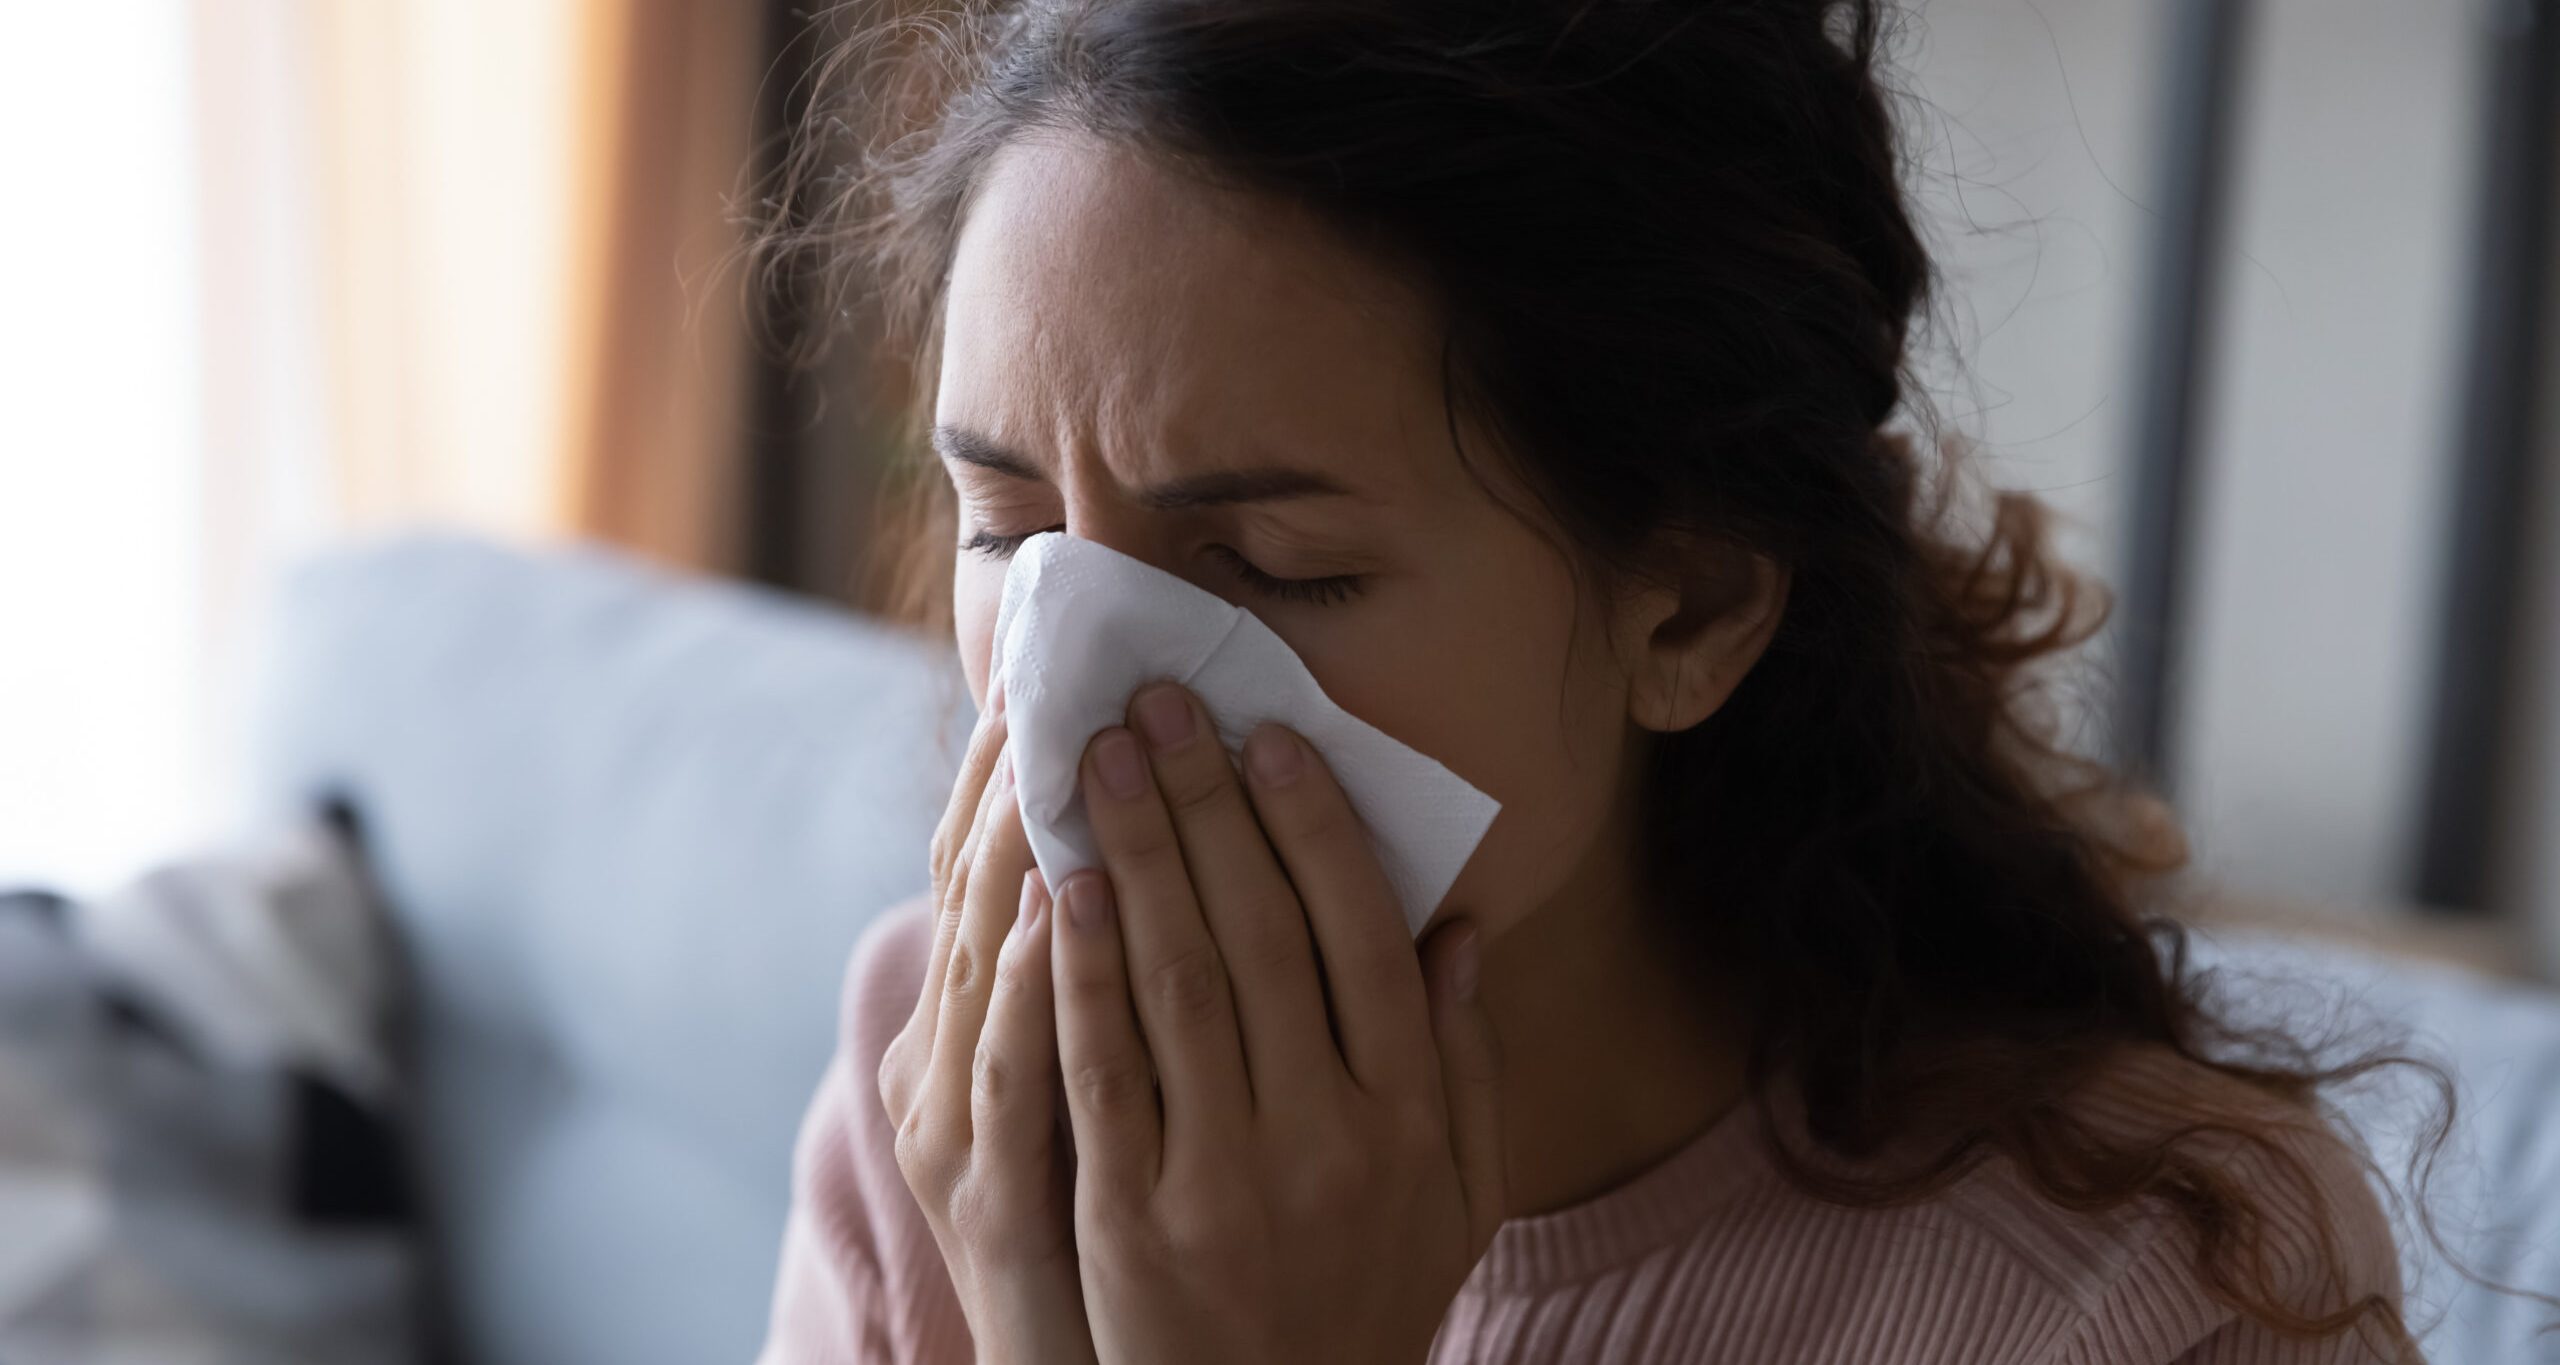 Unhealthy young lady using paper tissue, wiping runny nose.